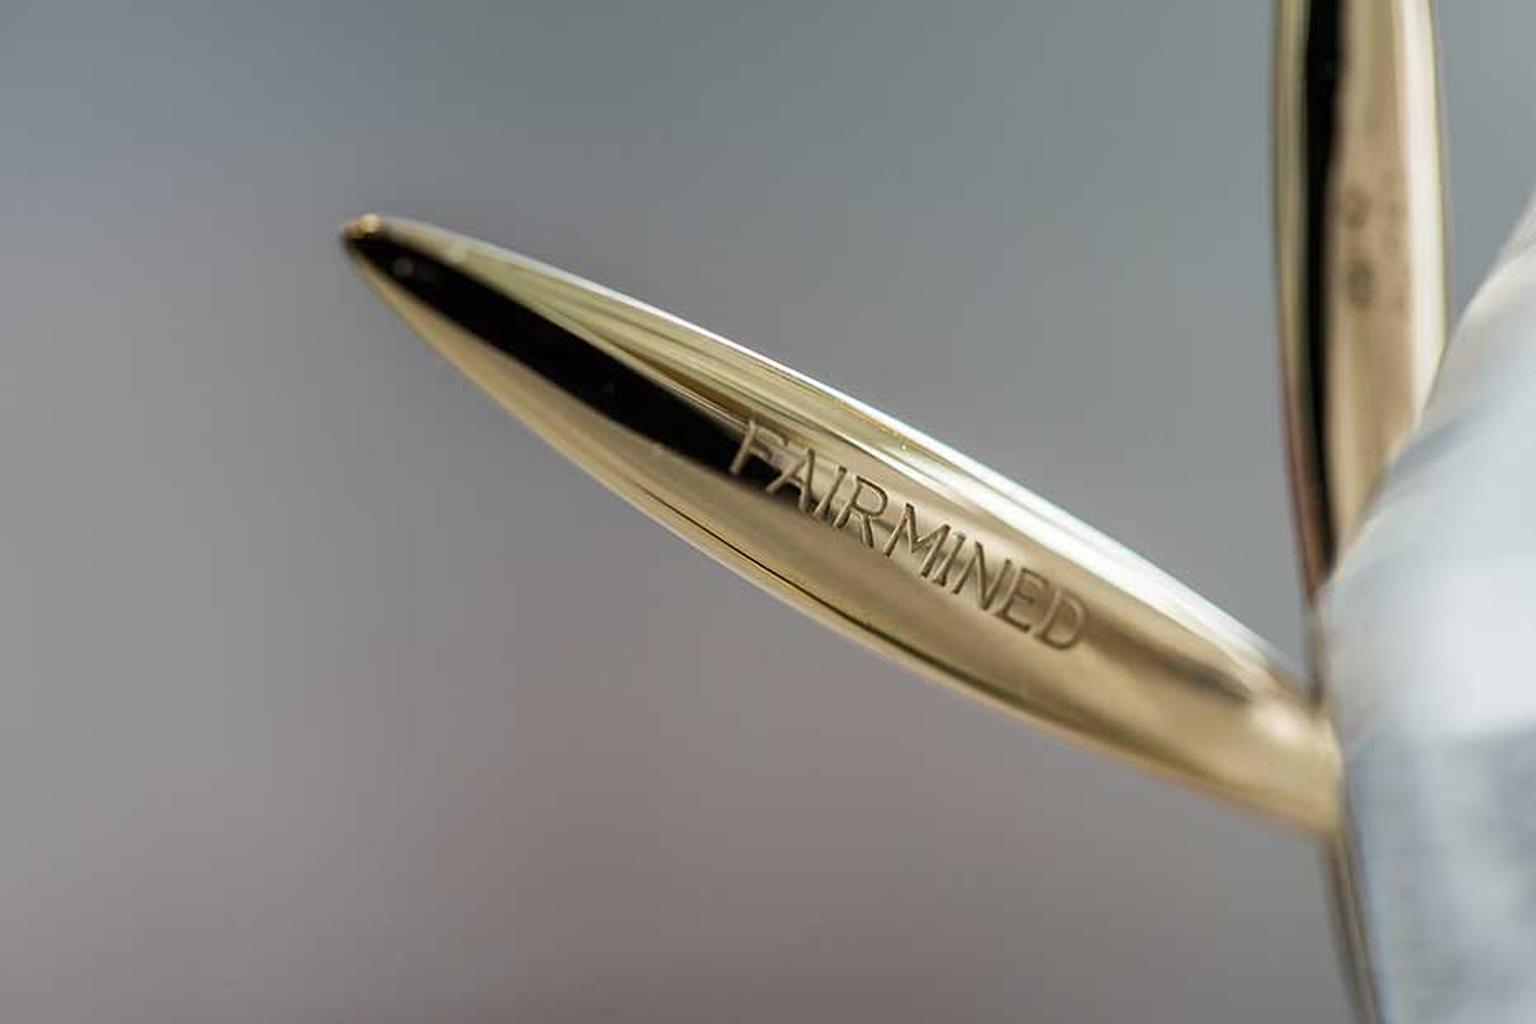 On the reverse of one of the feathery palm leaves that decorate the 2014 Palme d'Or award, Fairmined is stamped in capital letters in recognition of Chopard's commitment to sustainable luxury